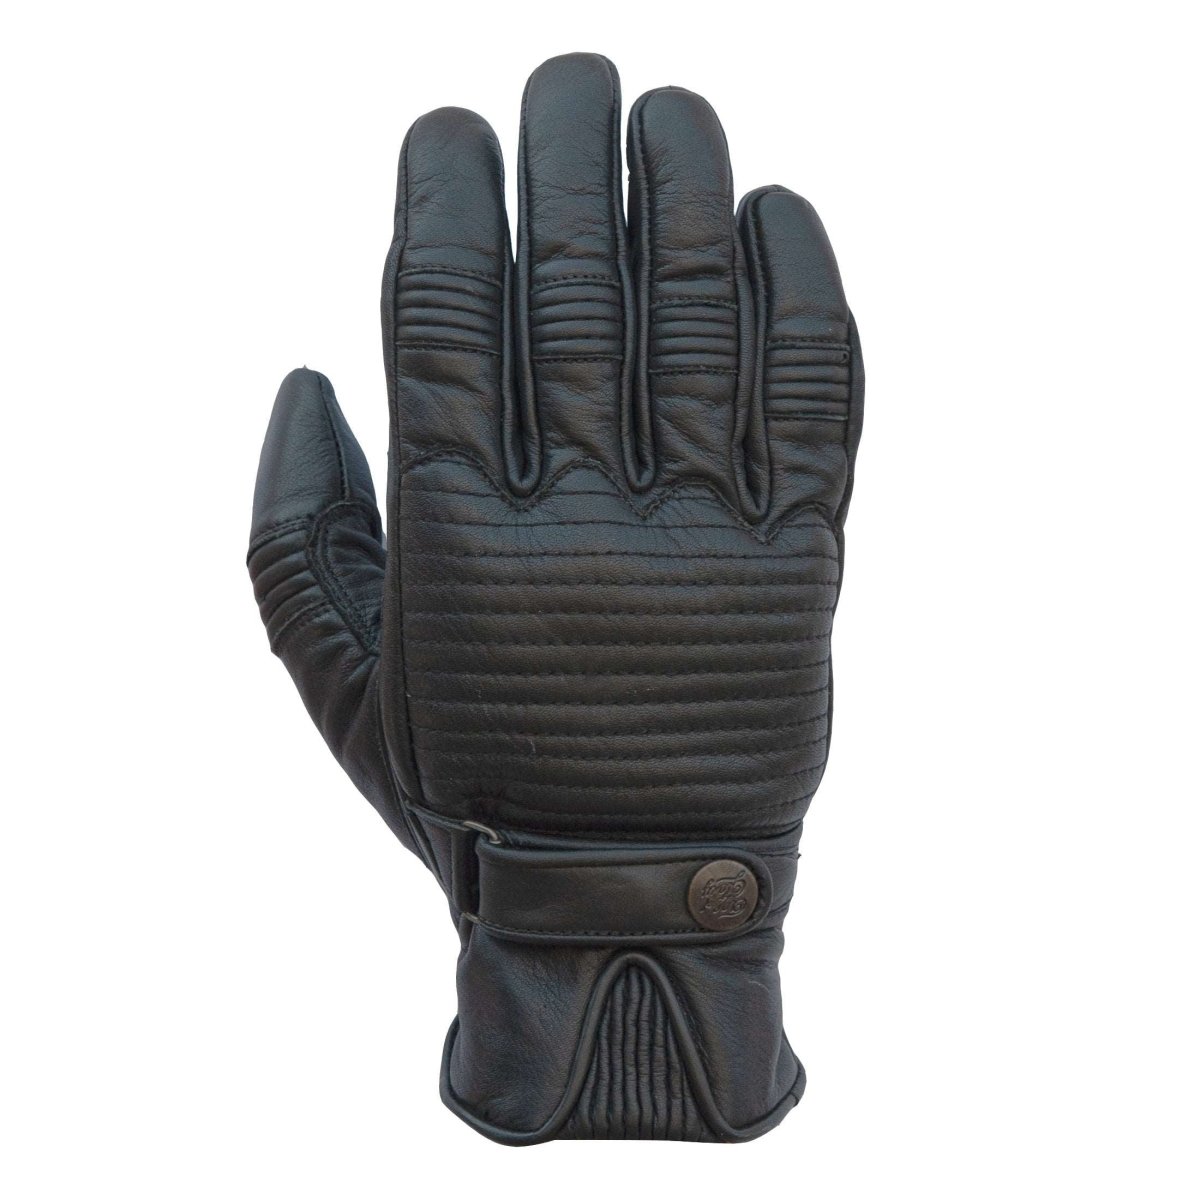 Age of Glory Garage Leather CE Gloves in Black 